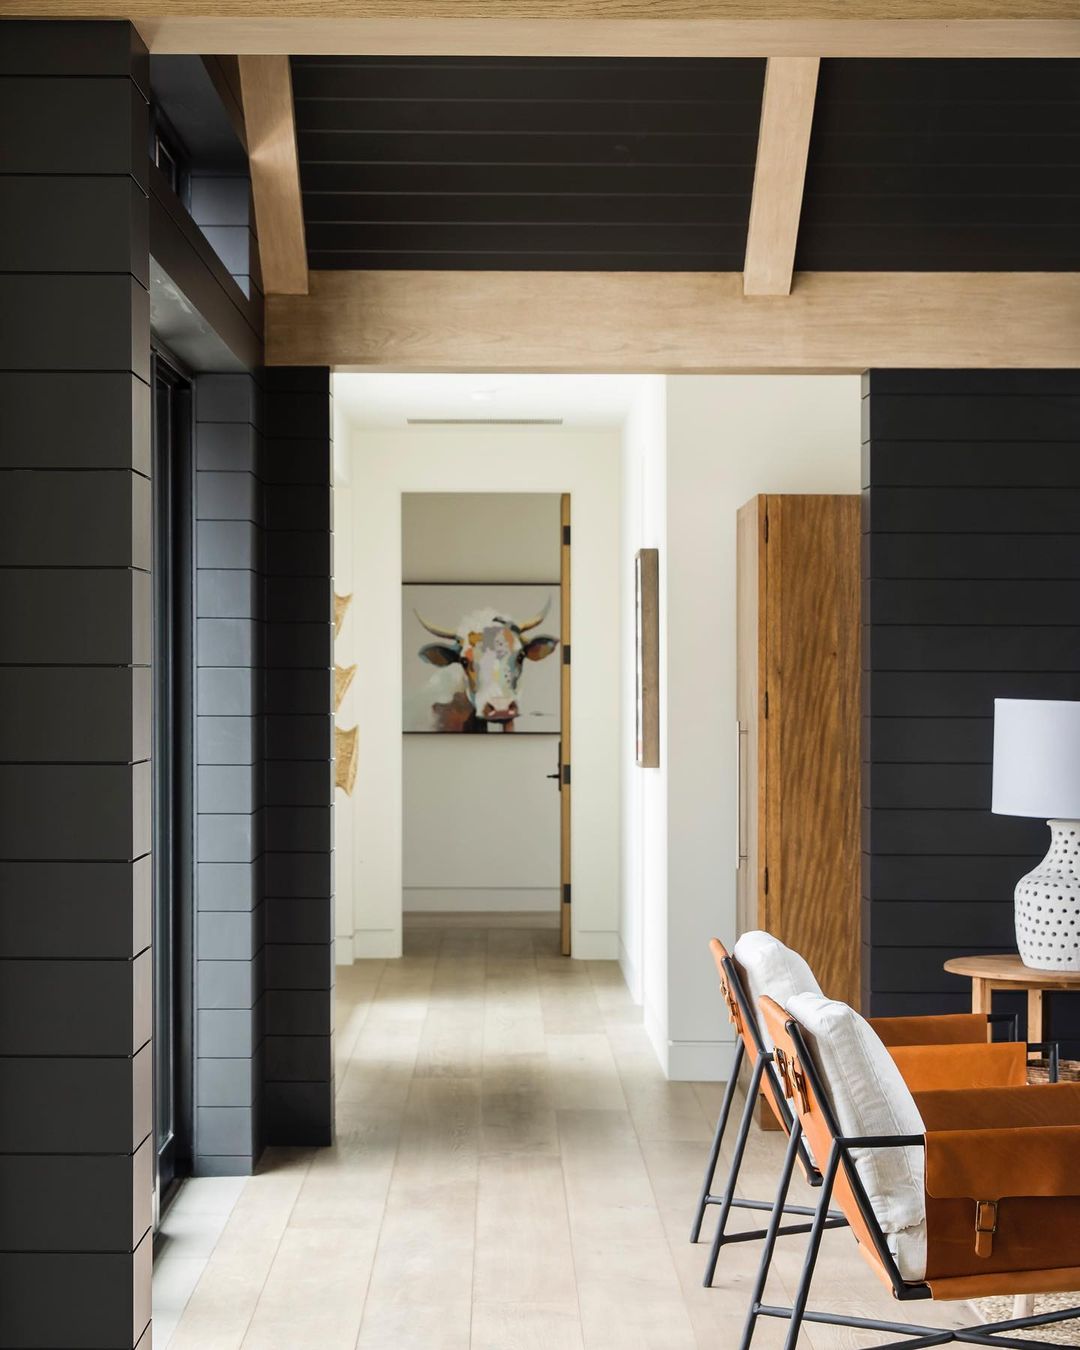 Dark Accents and Light Wood Beams for a Striking Hallway